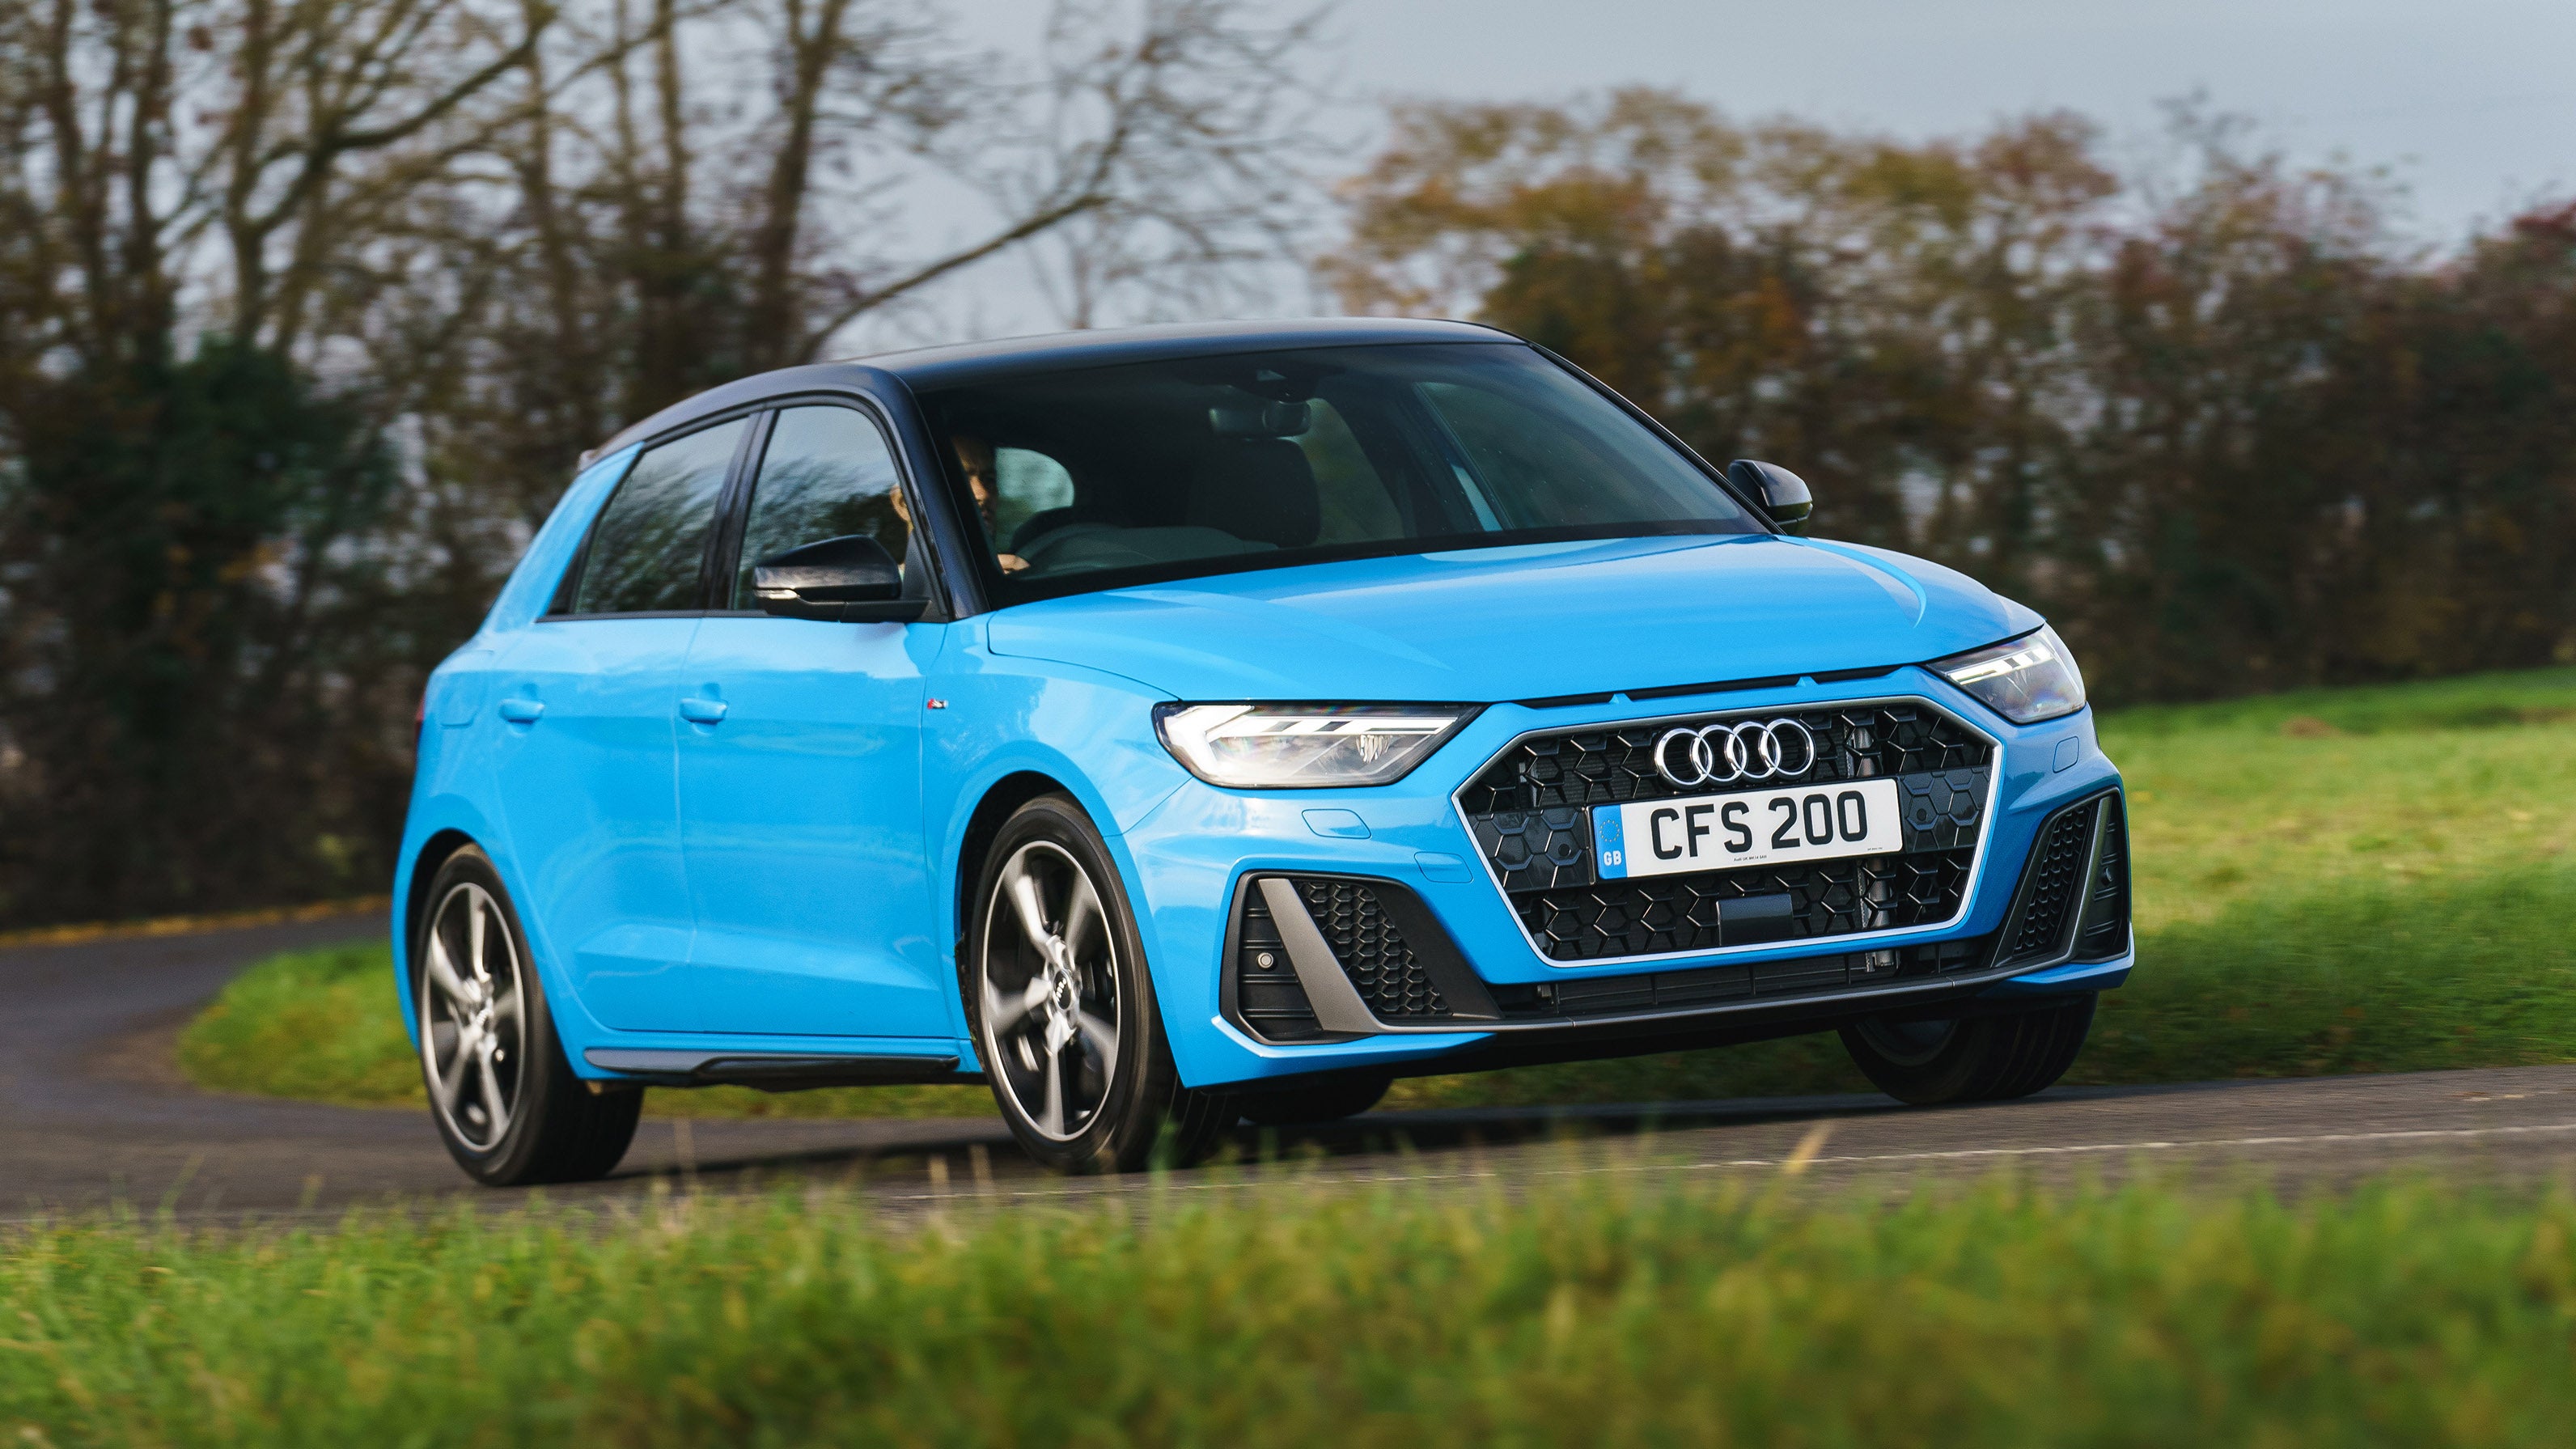 Audi A1 News and Reviews